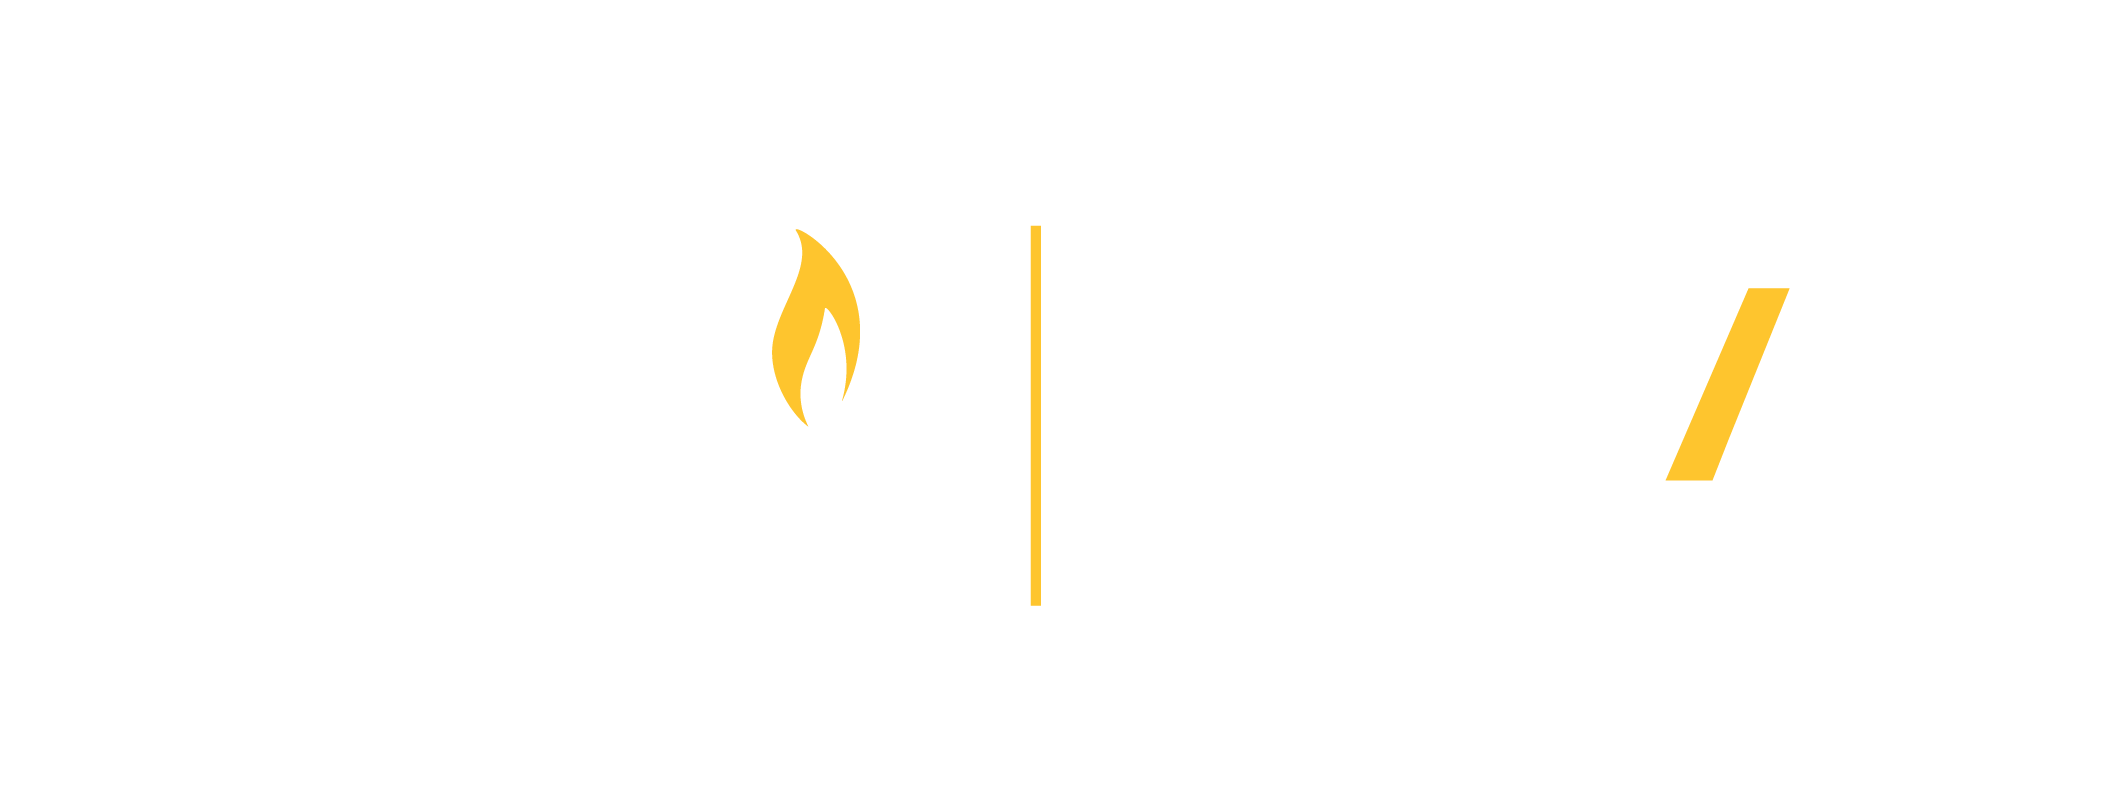 NKU and SOTA logo side by side in white.